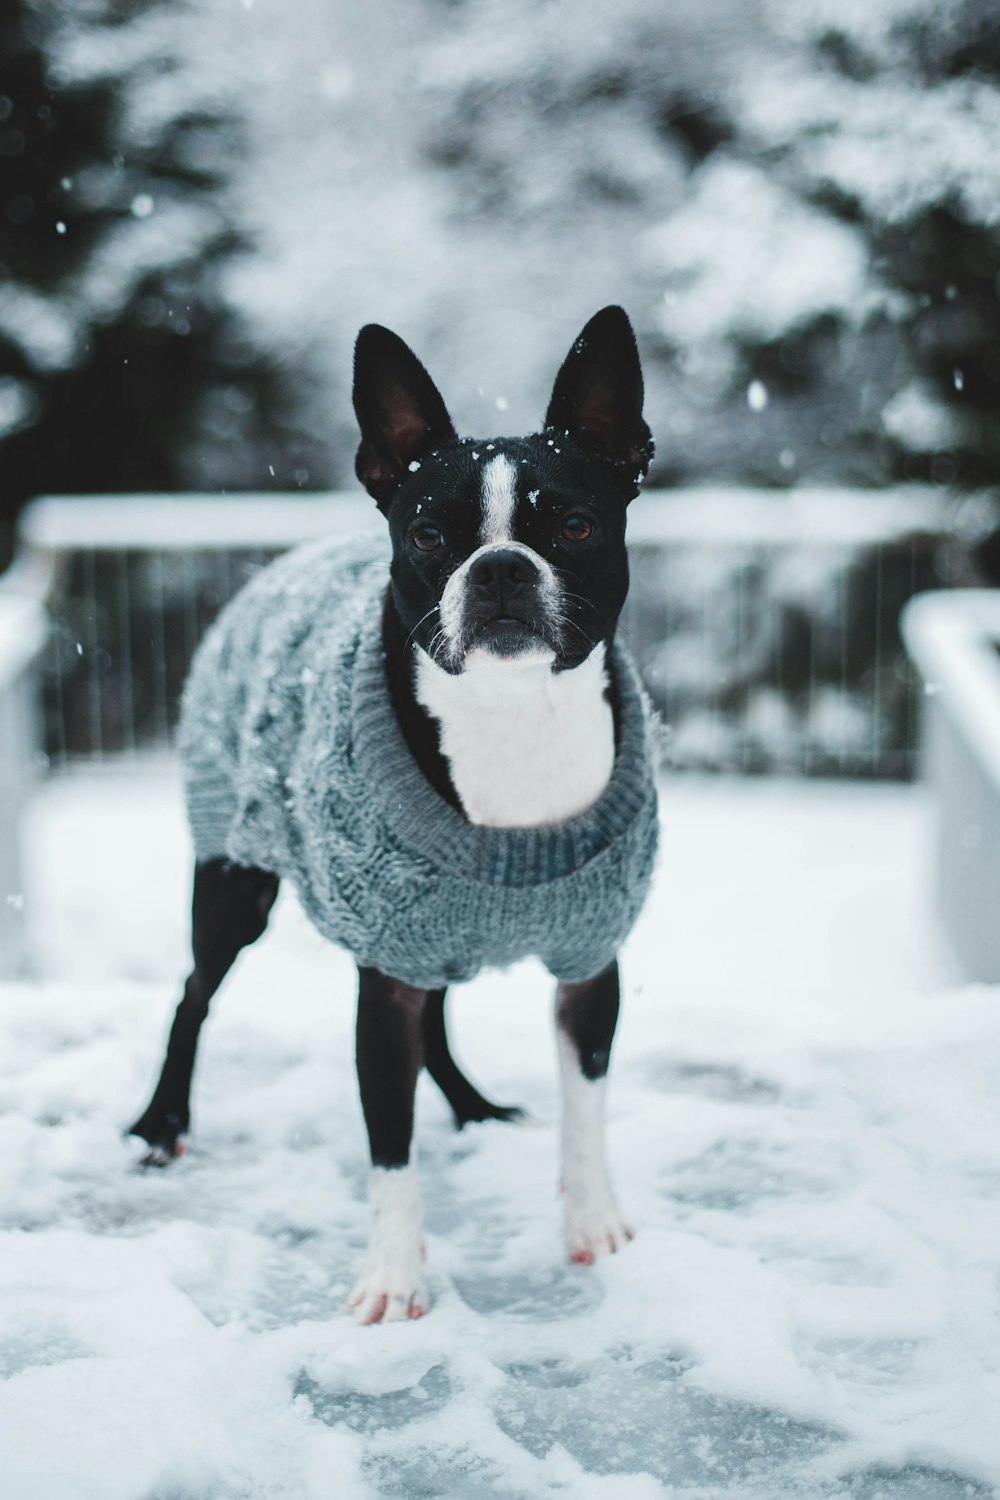 black and white dog with gray knitted sweater on snow field